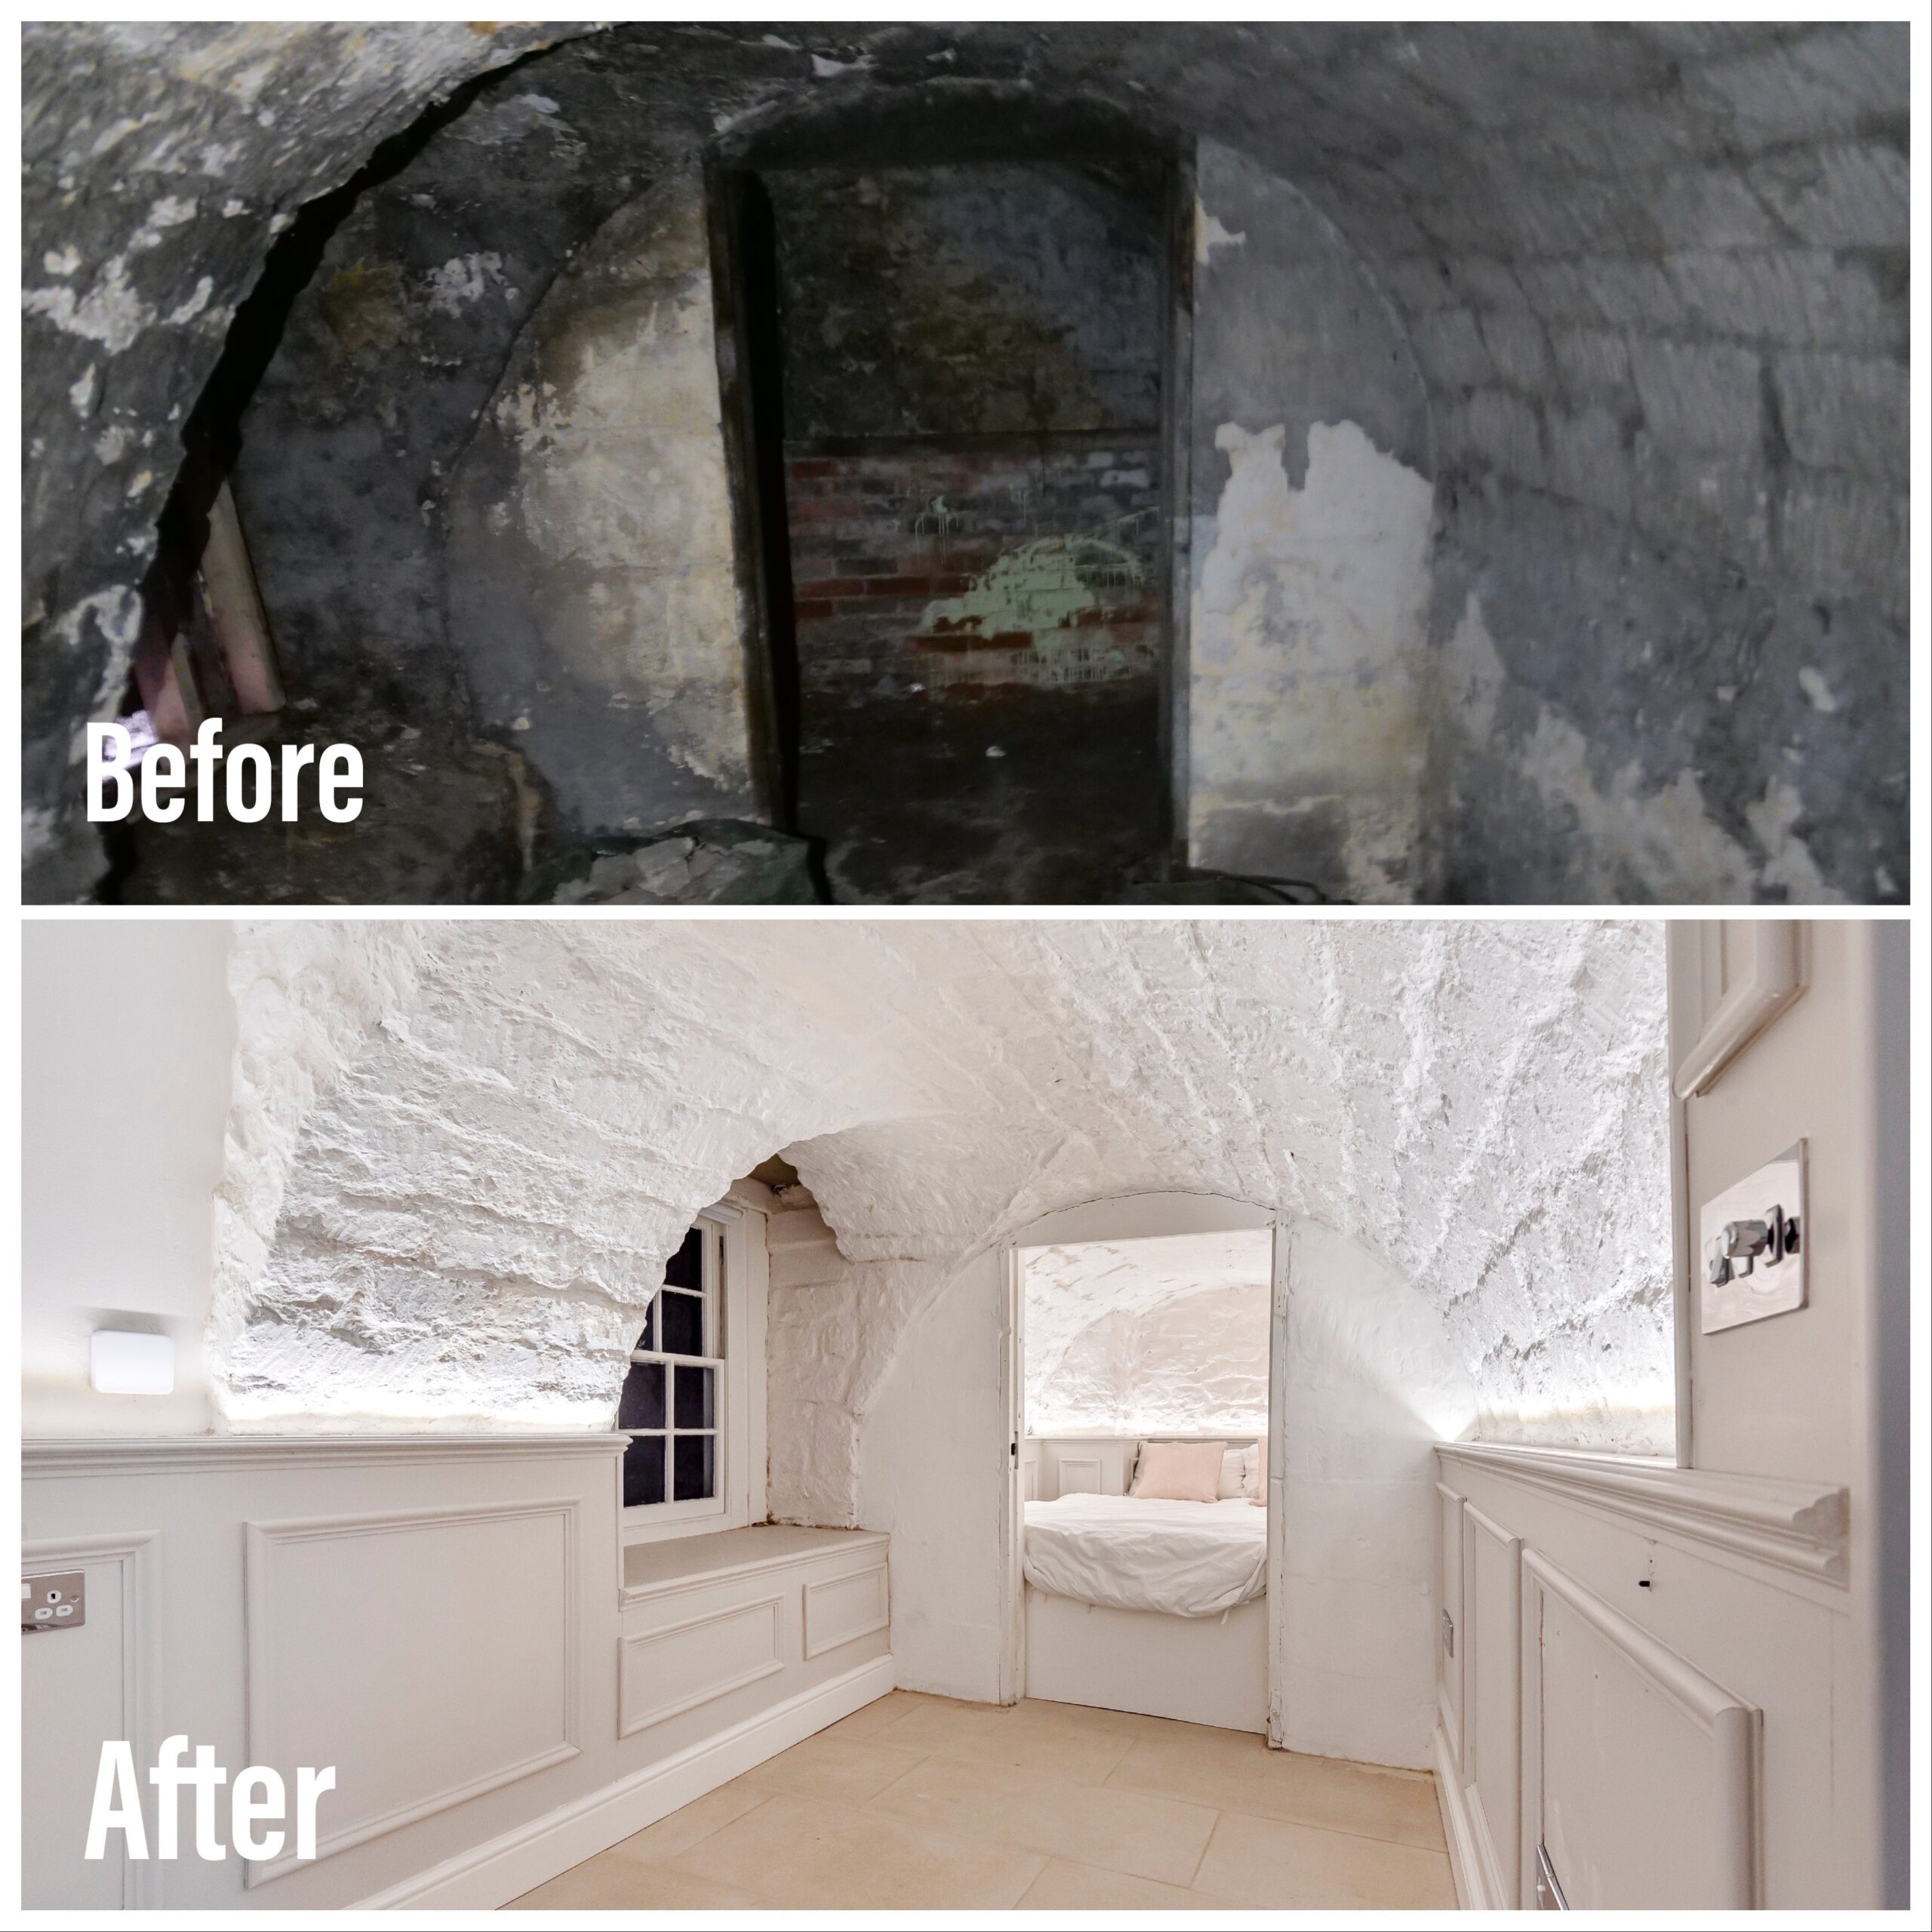 The damp vaults in the historic property were painted with breathable Claypaint